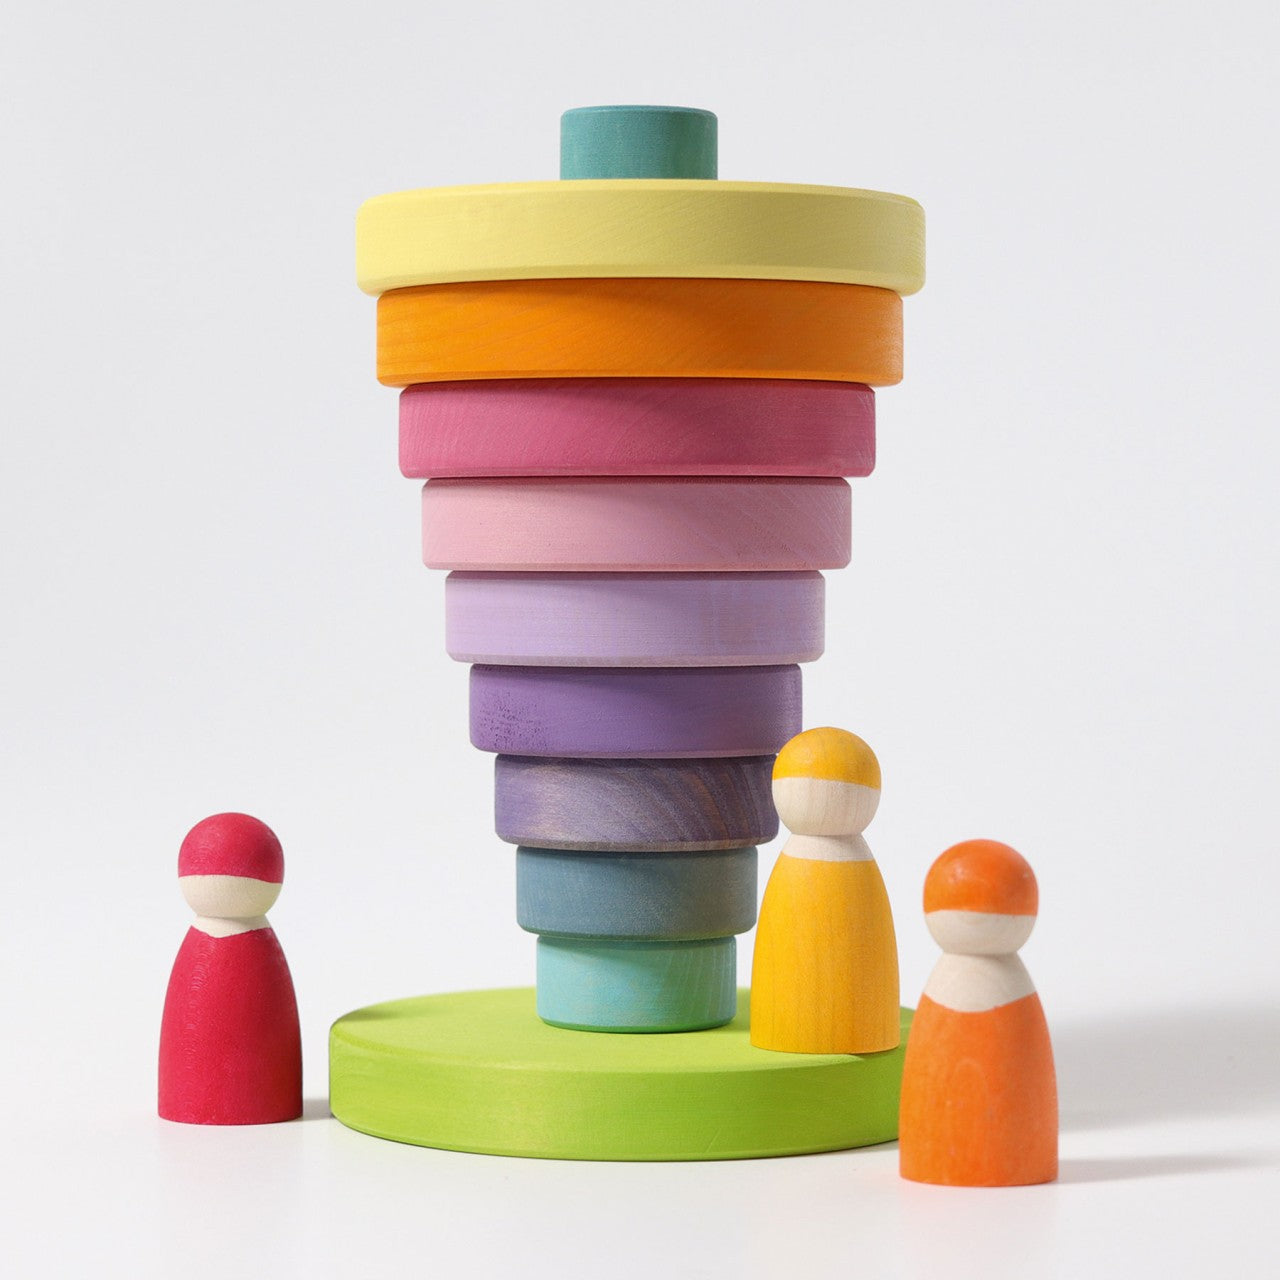 Pastel Conical Tower Stacker | Wooden Toys for Kids | Toddler Activity Toy